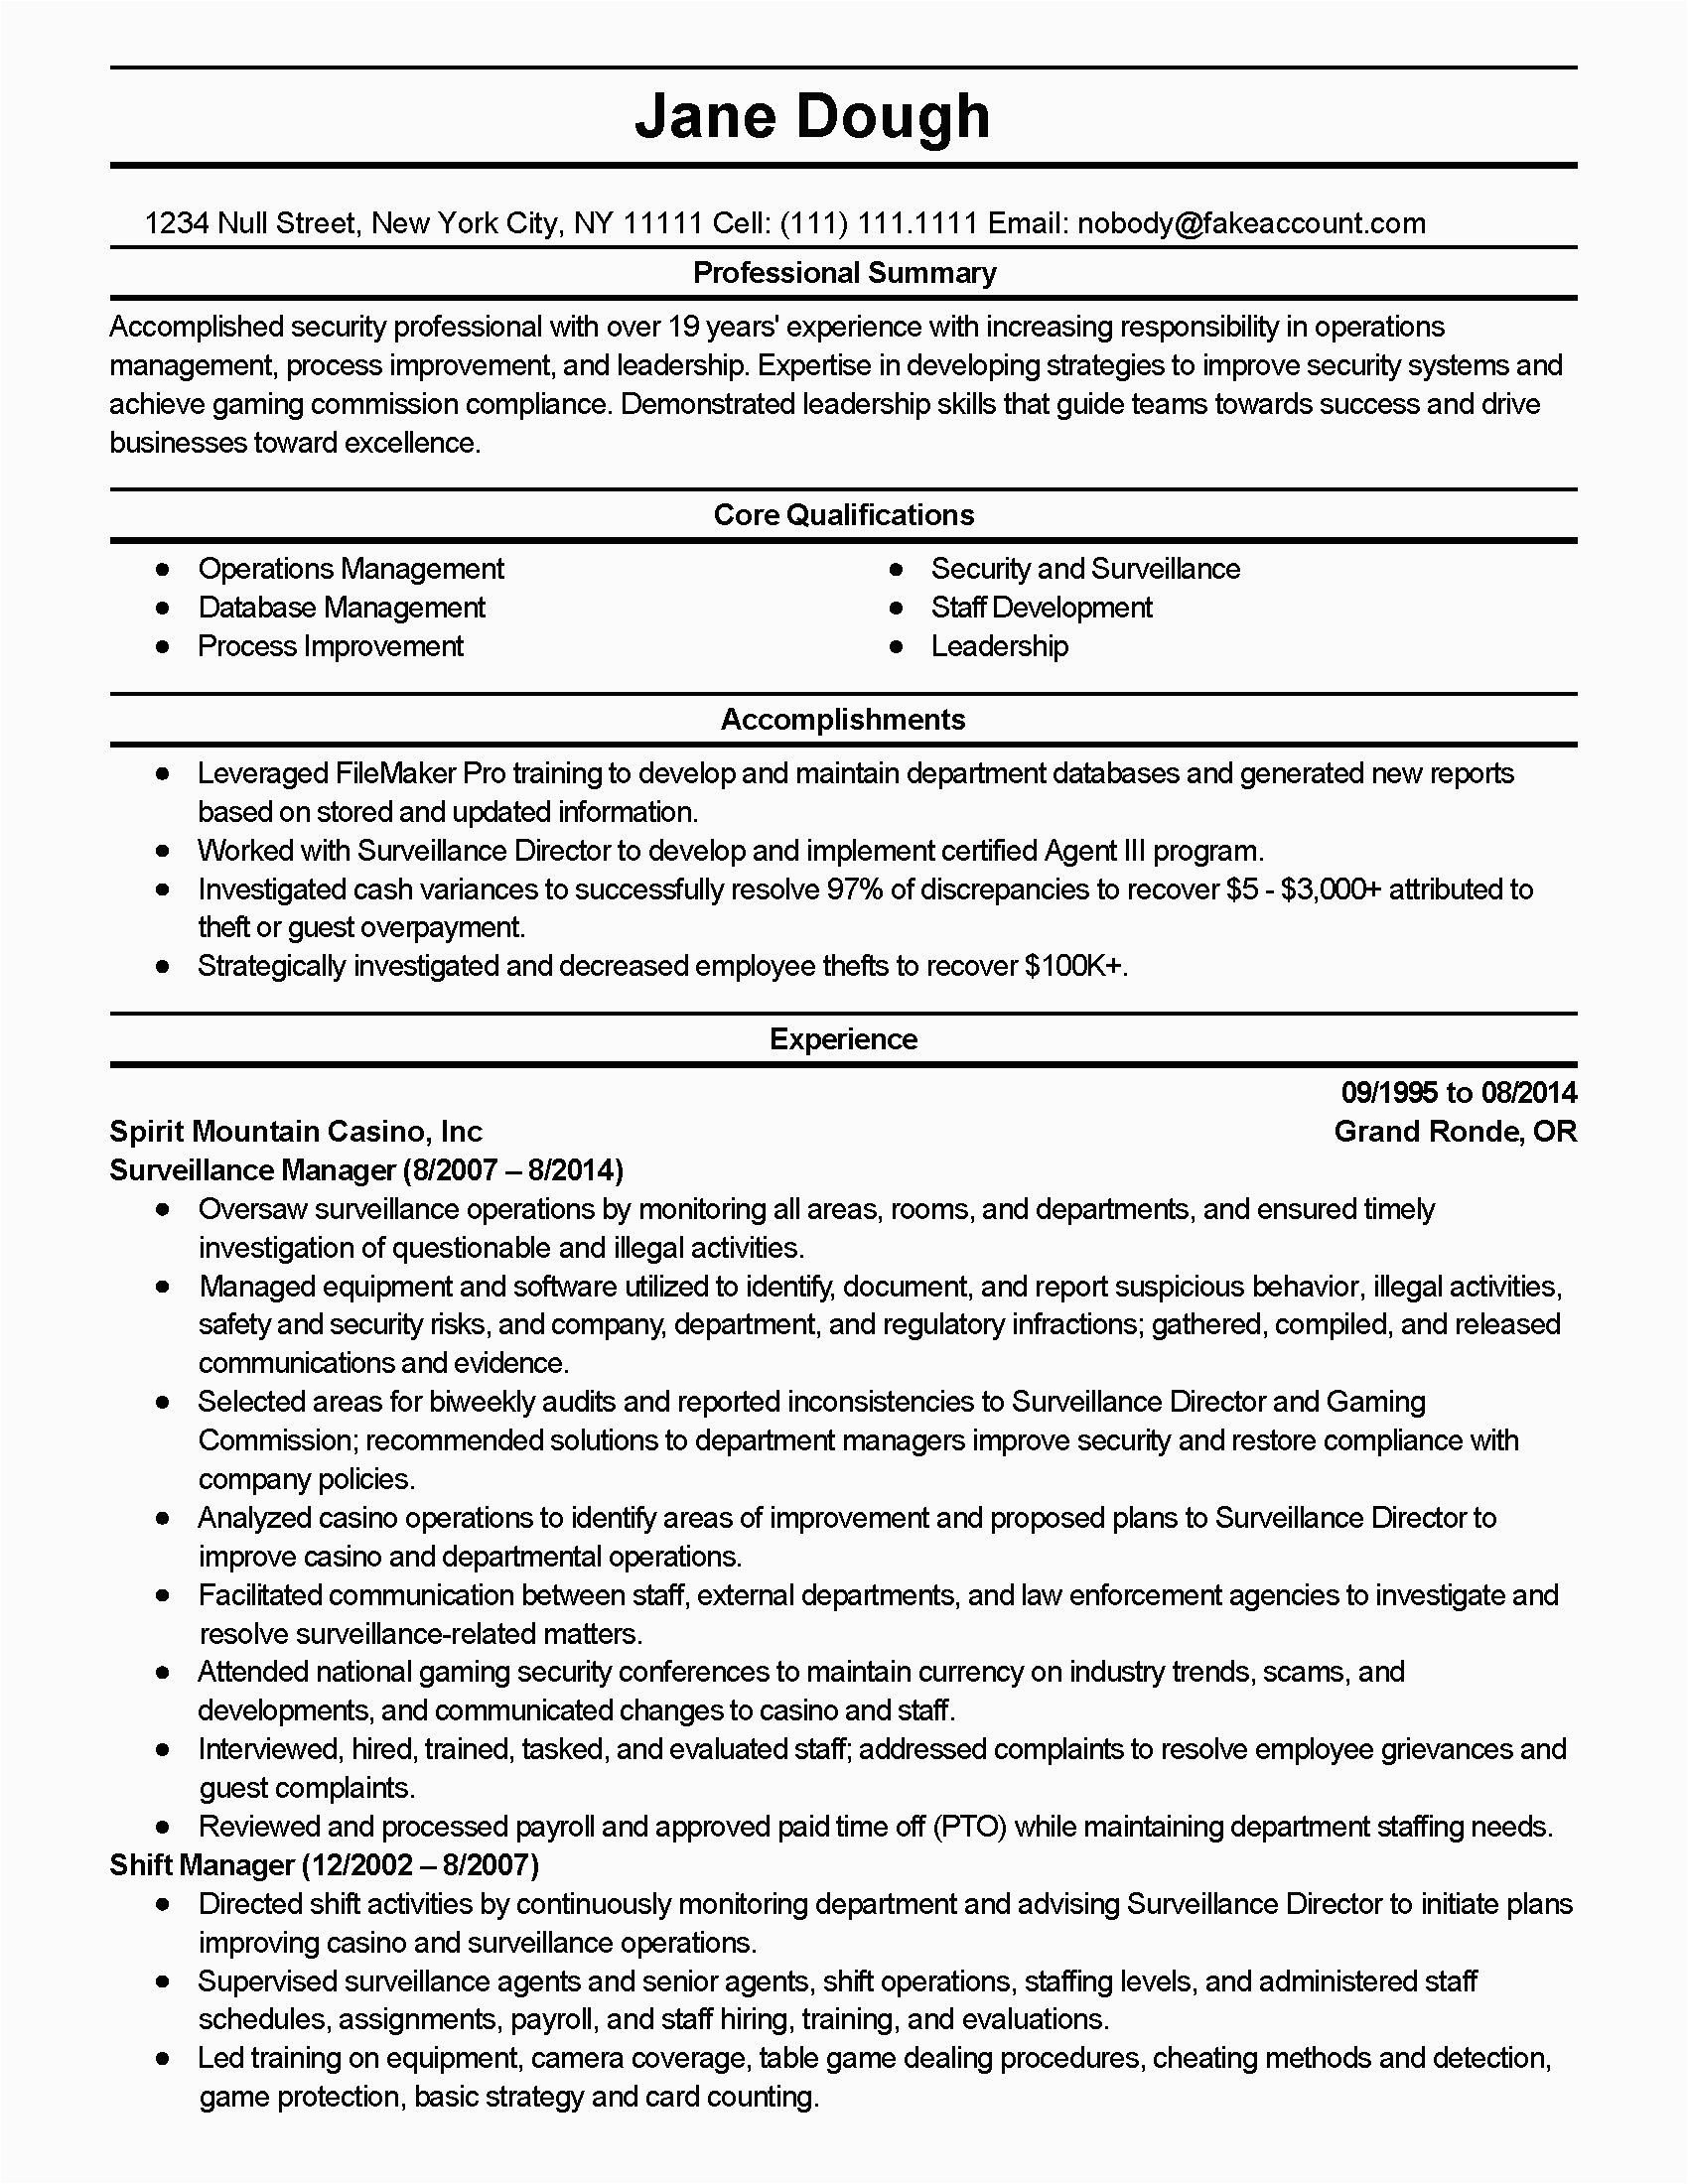 entry level network security engineer